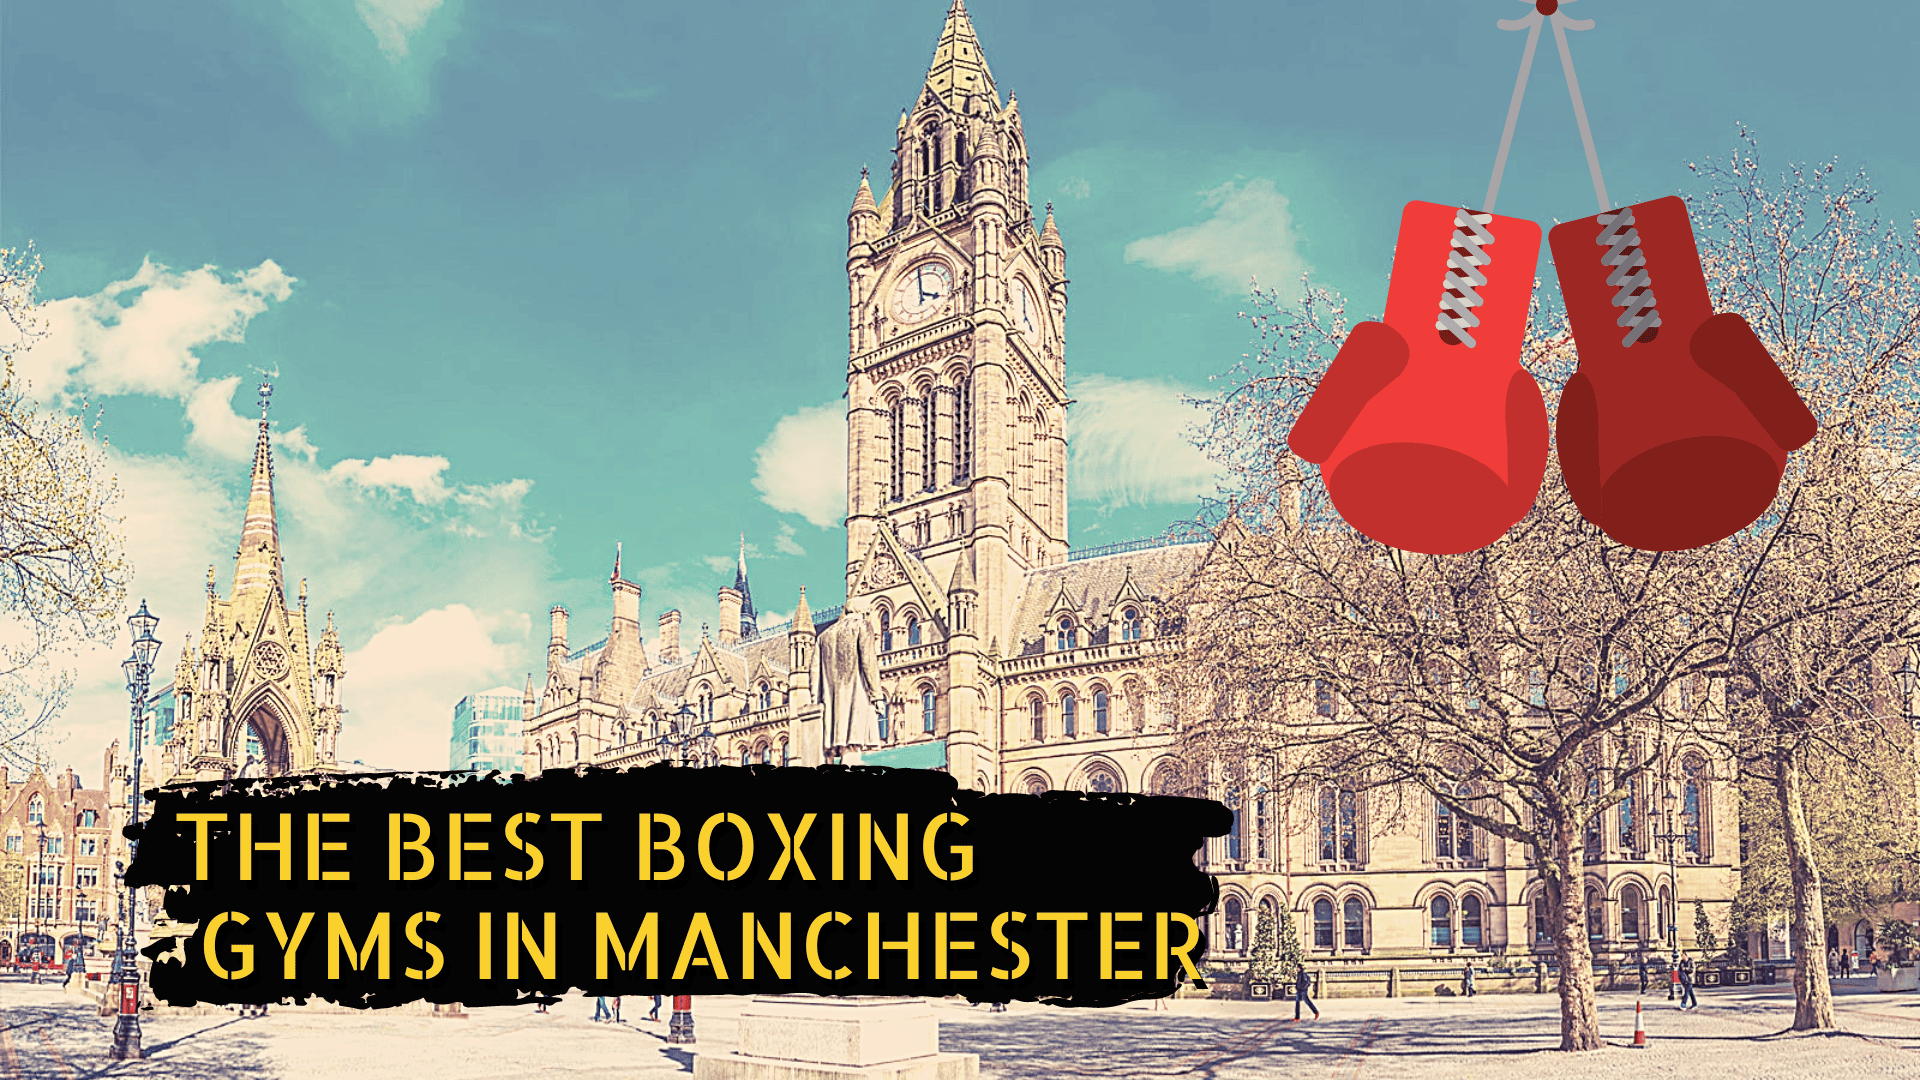 Manchester cathedral and the title the best boxing gyms in manchester